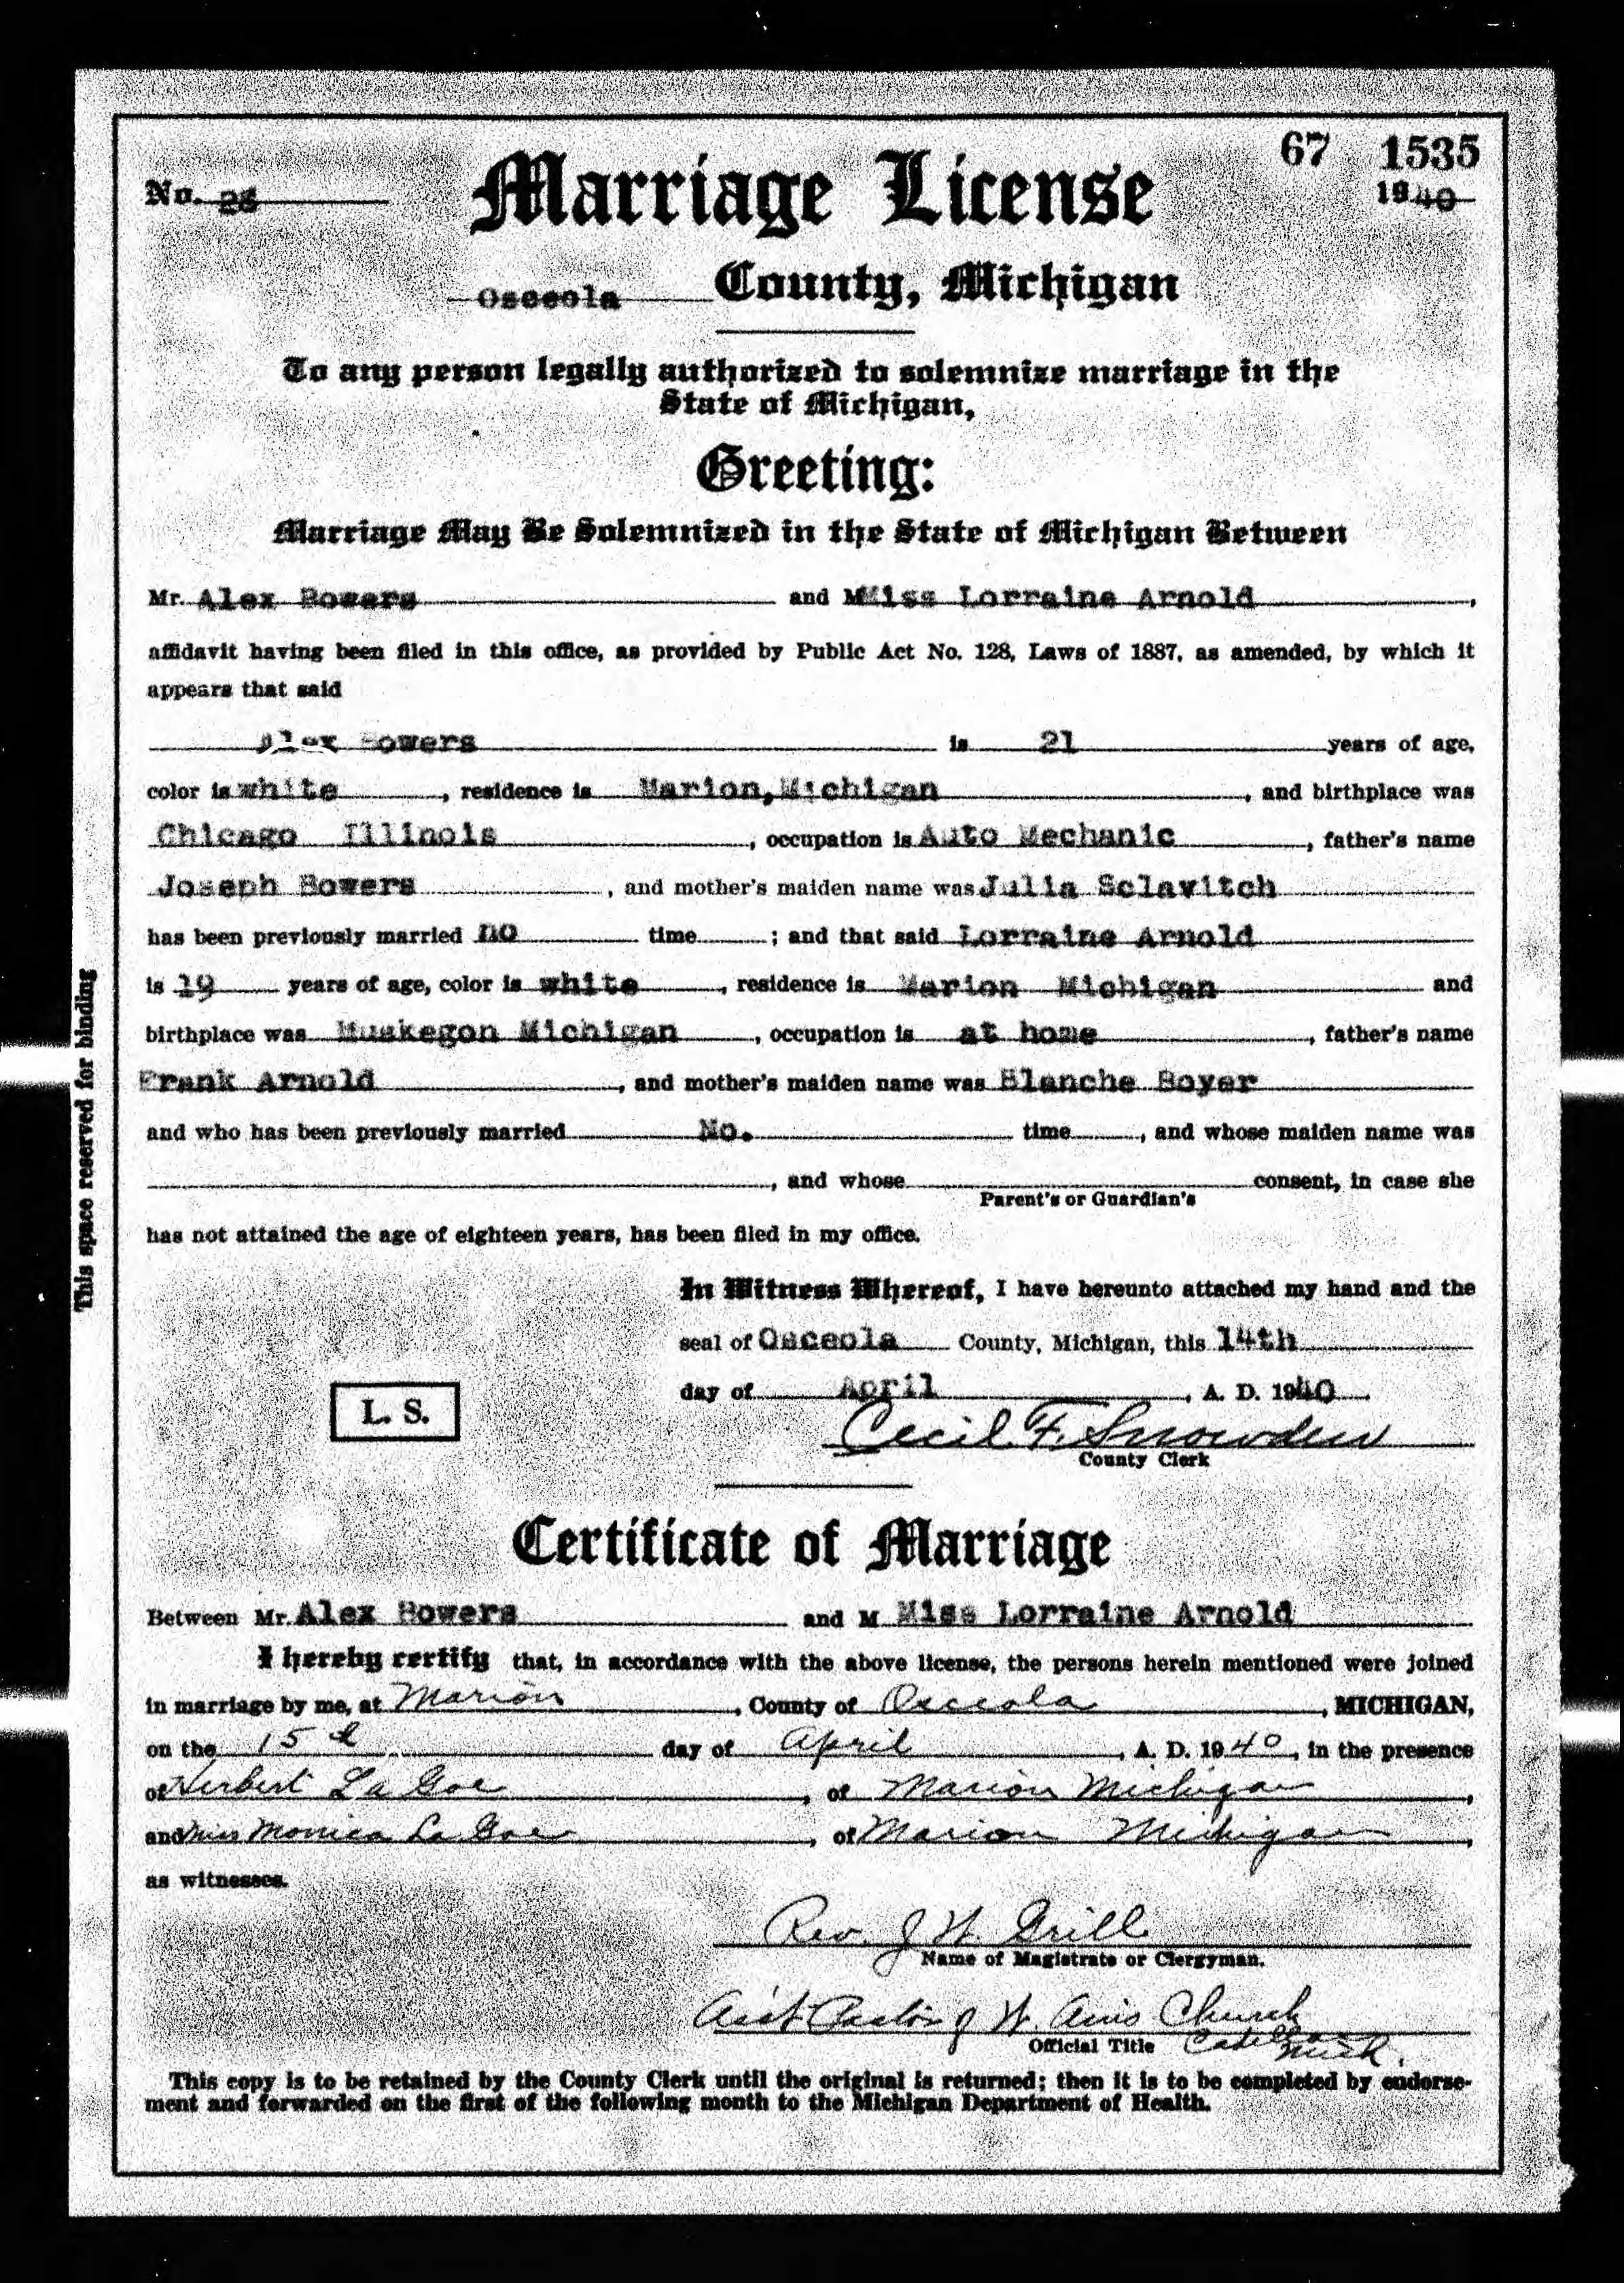 Lorraine (Arnold) and Alex Bowers Marriage Certificate